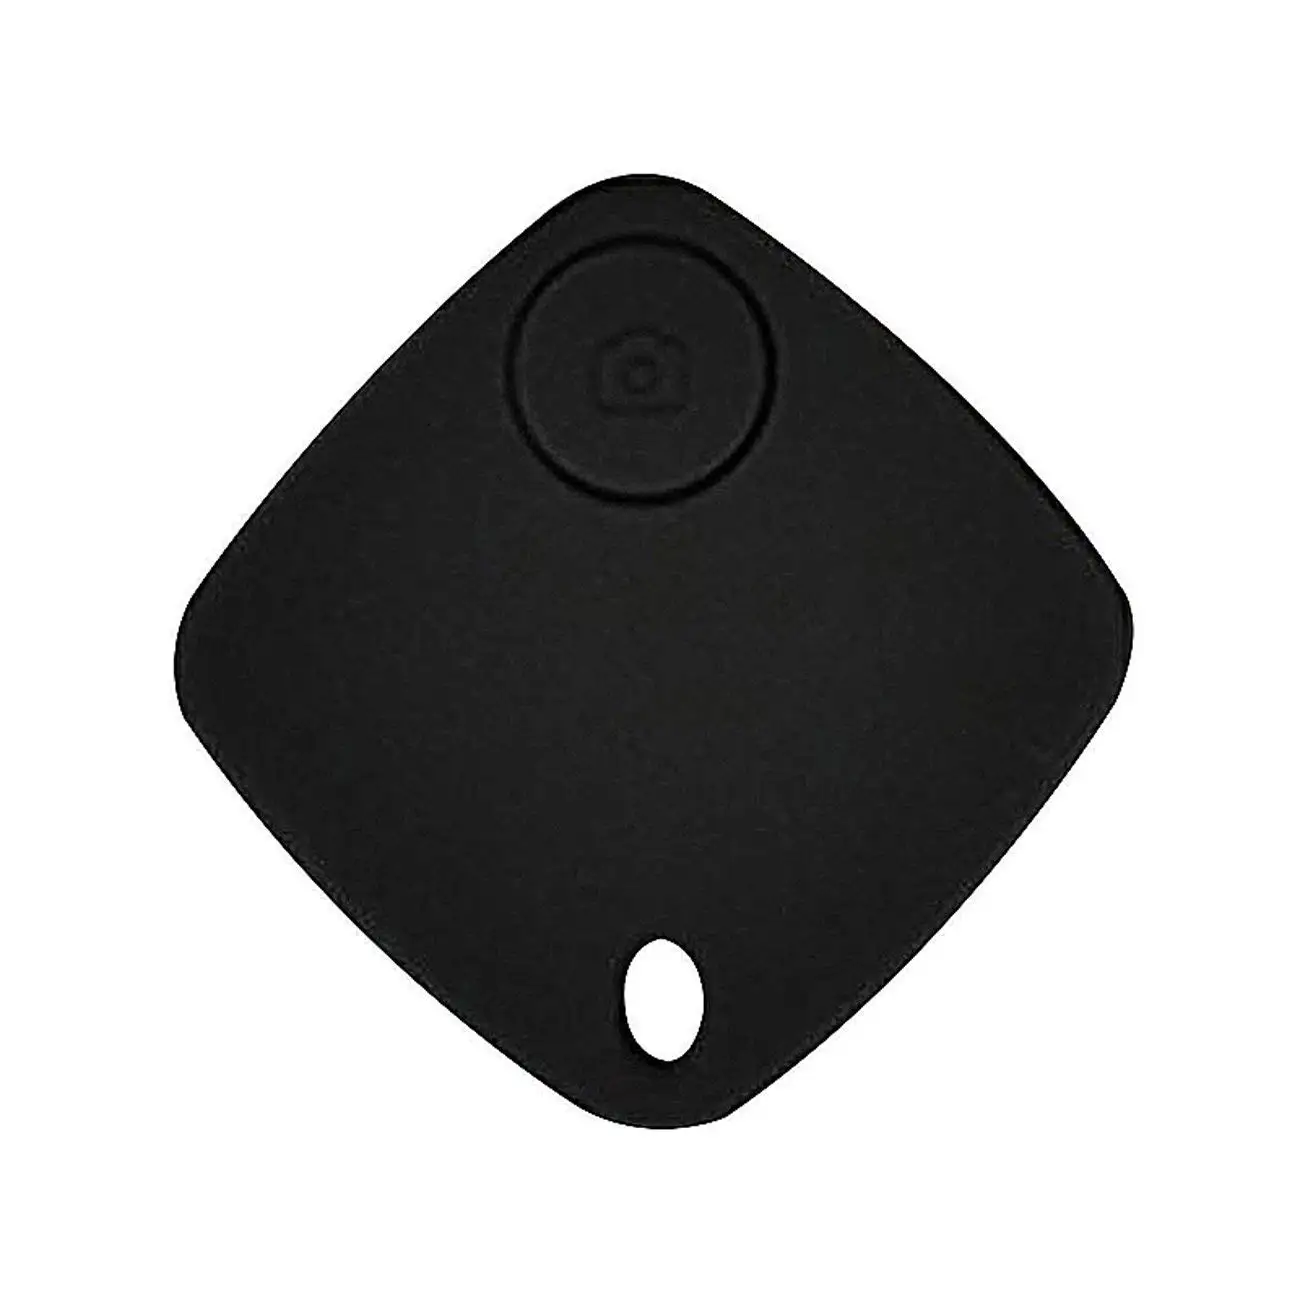 tagit tracking device with alarm